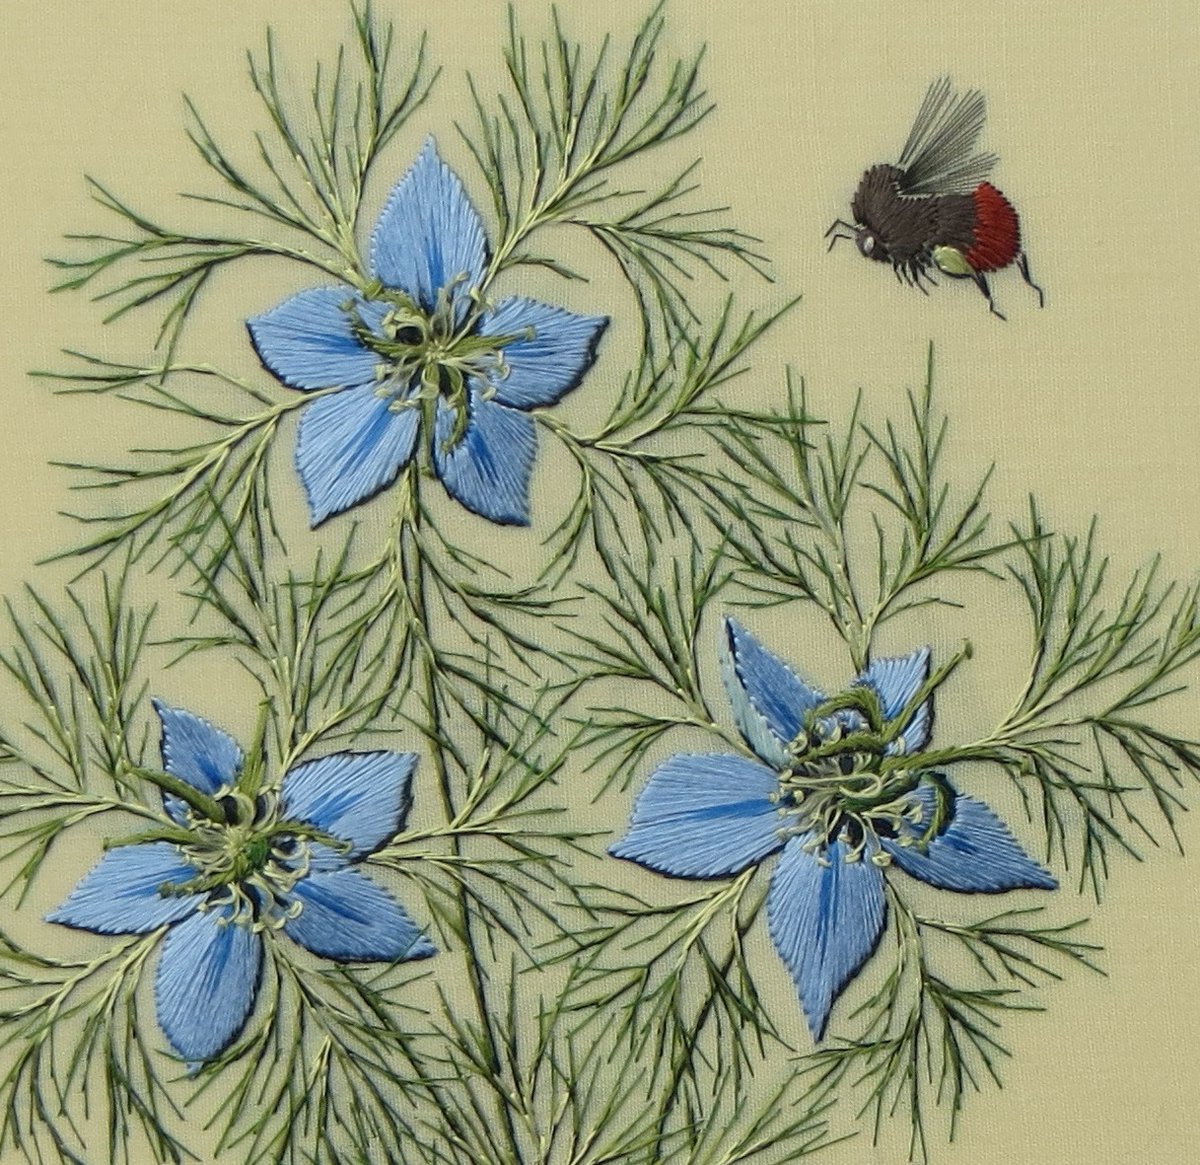 Another glorious day and the nigella is out and attracting the bees.
Folk names include 'ragged lady'  and 'Devil in the bush' (the latter seems a rather unfair name for such a useful and traditionally indispensable medicinal plant) #wildflowers #embroidery #handembroidery #bees